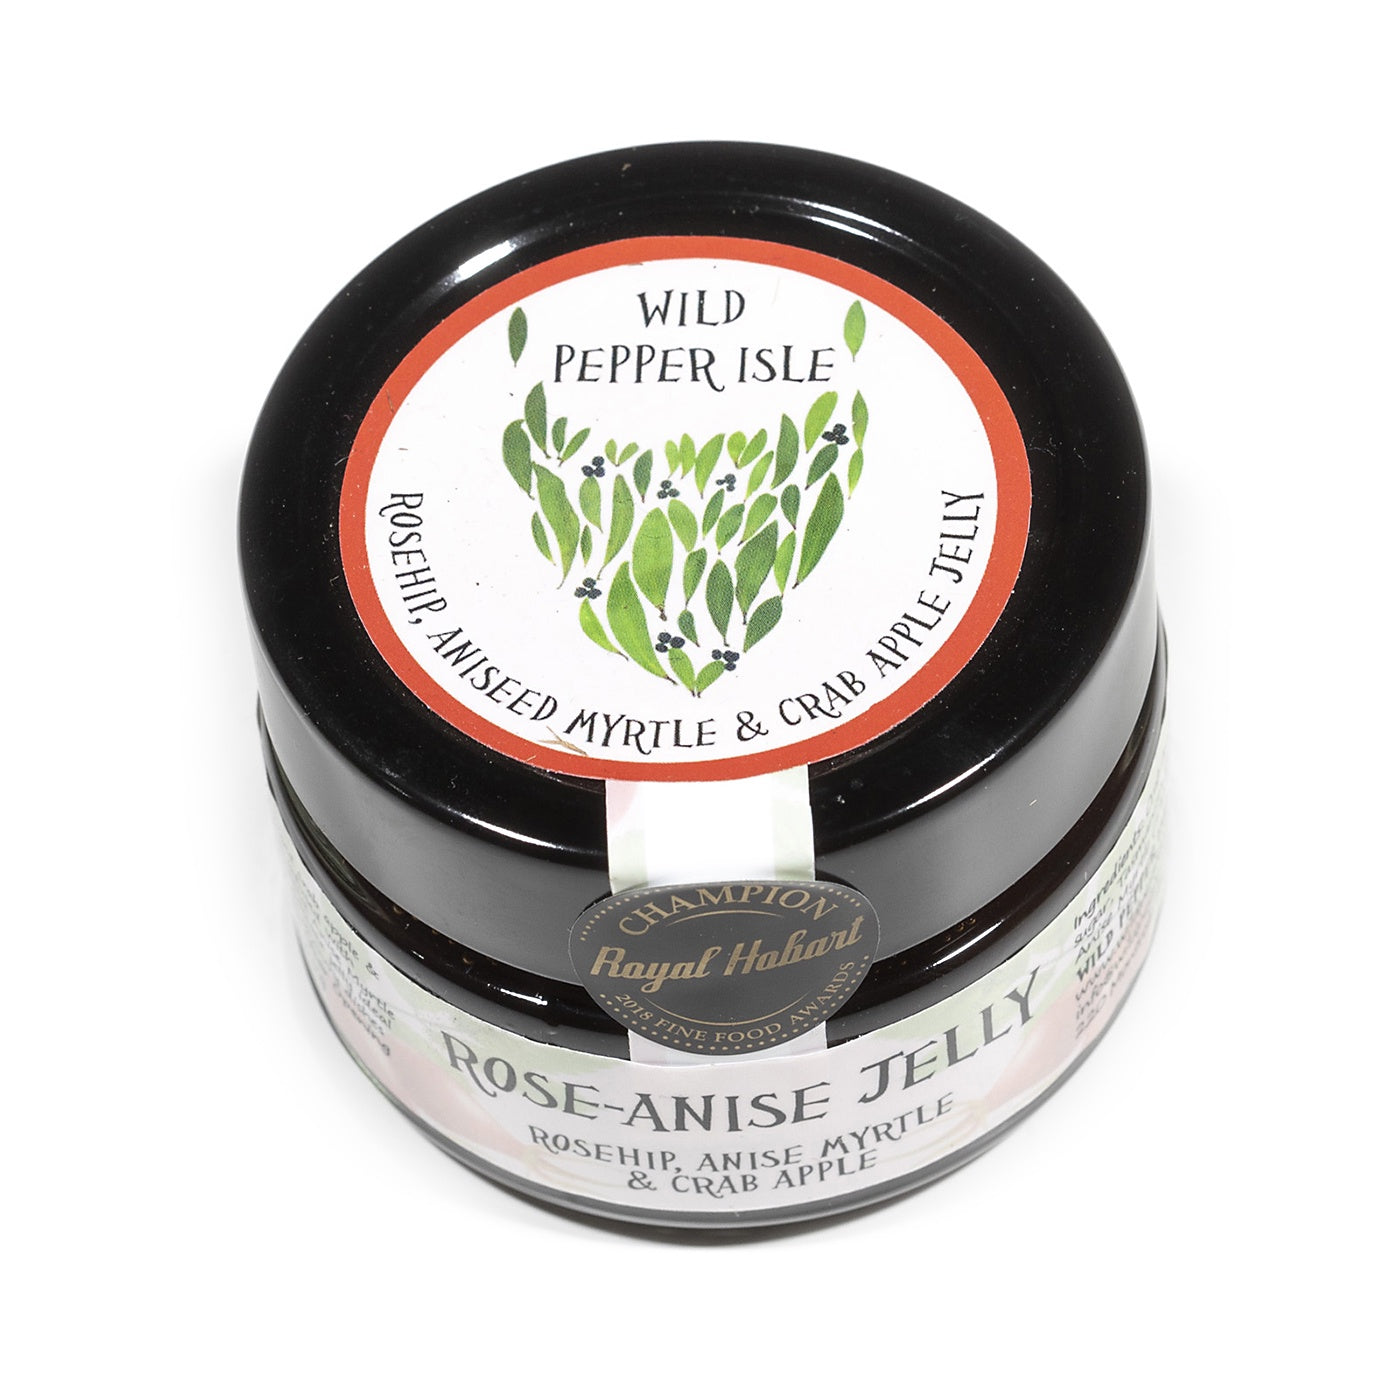 Wild Pepper Isle - (Forager' Jelly) Rose Anise Jelly